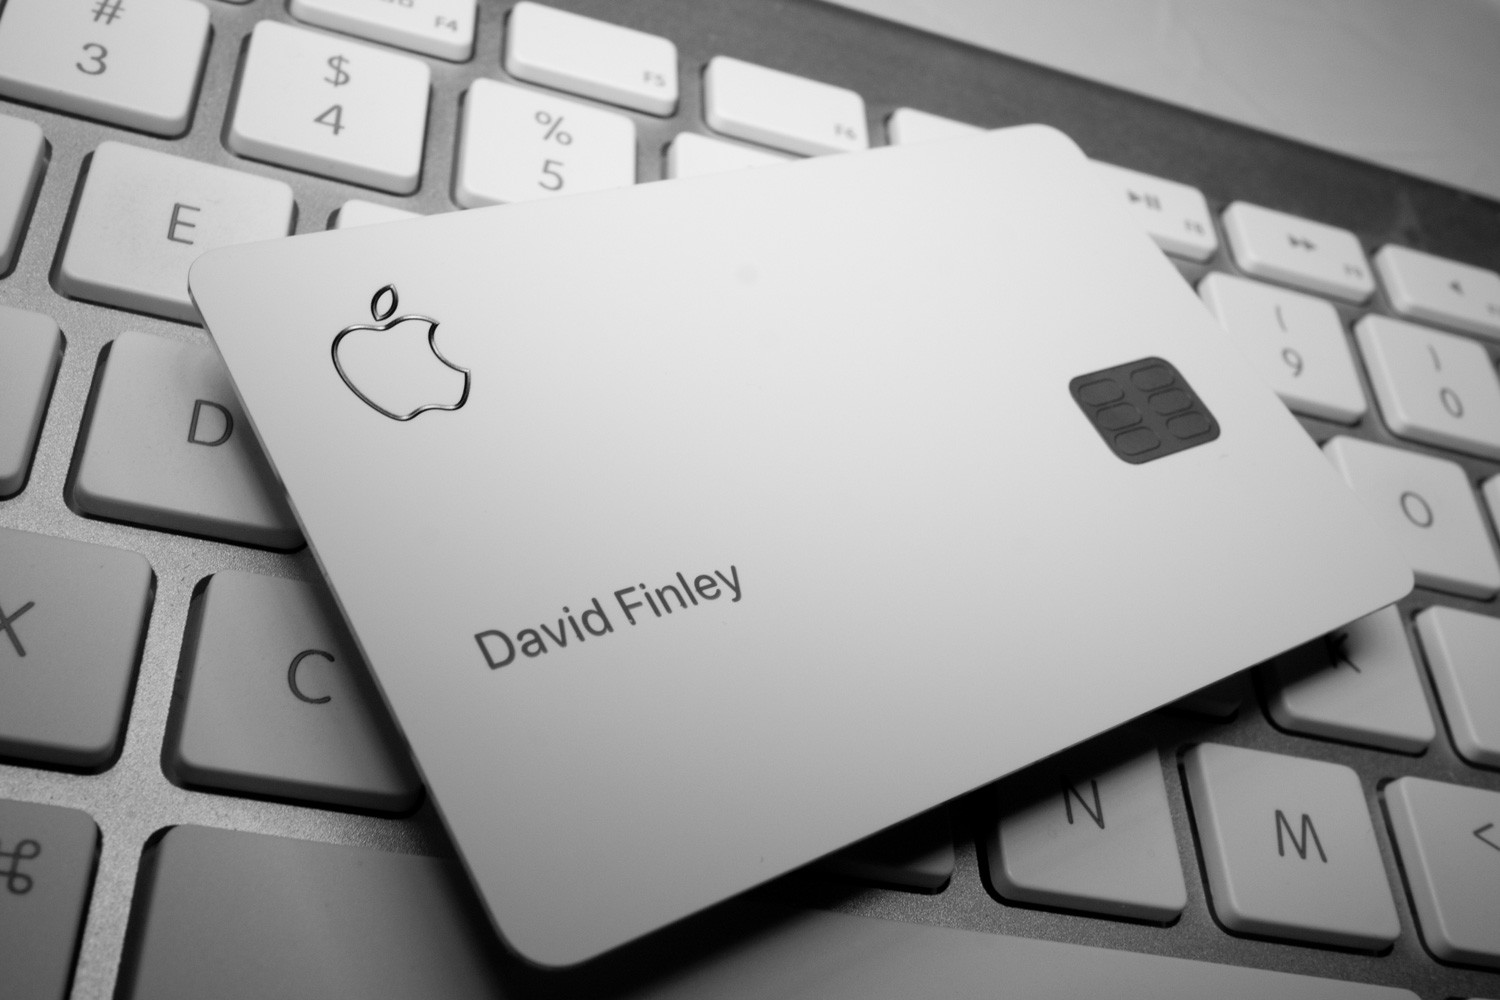 Physical Apple Mastercard Credit Card backed by Goldman Sachs on an Apple keyboard.